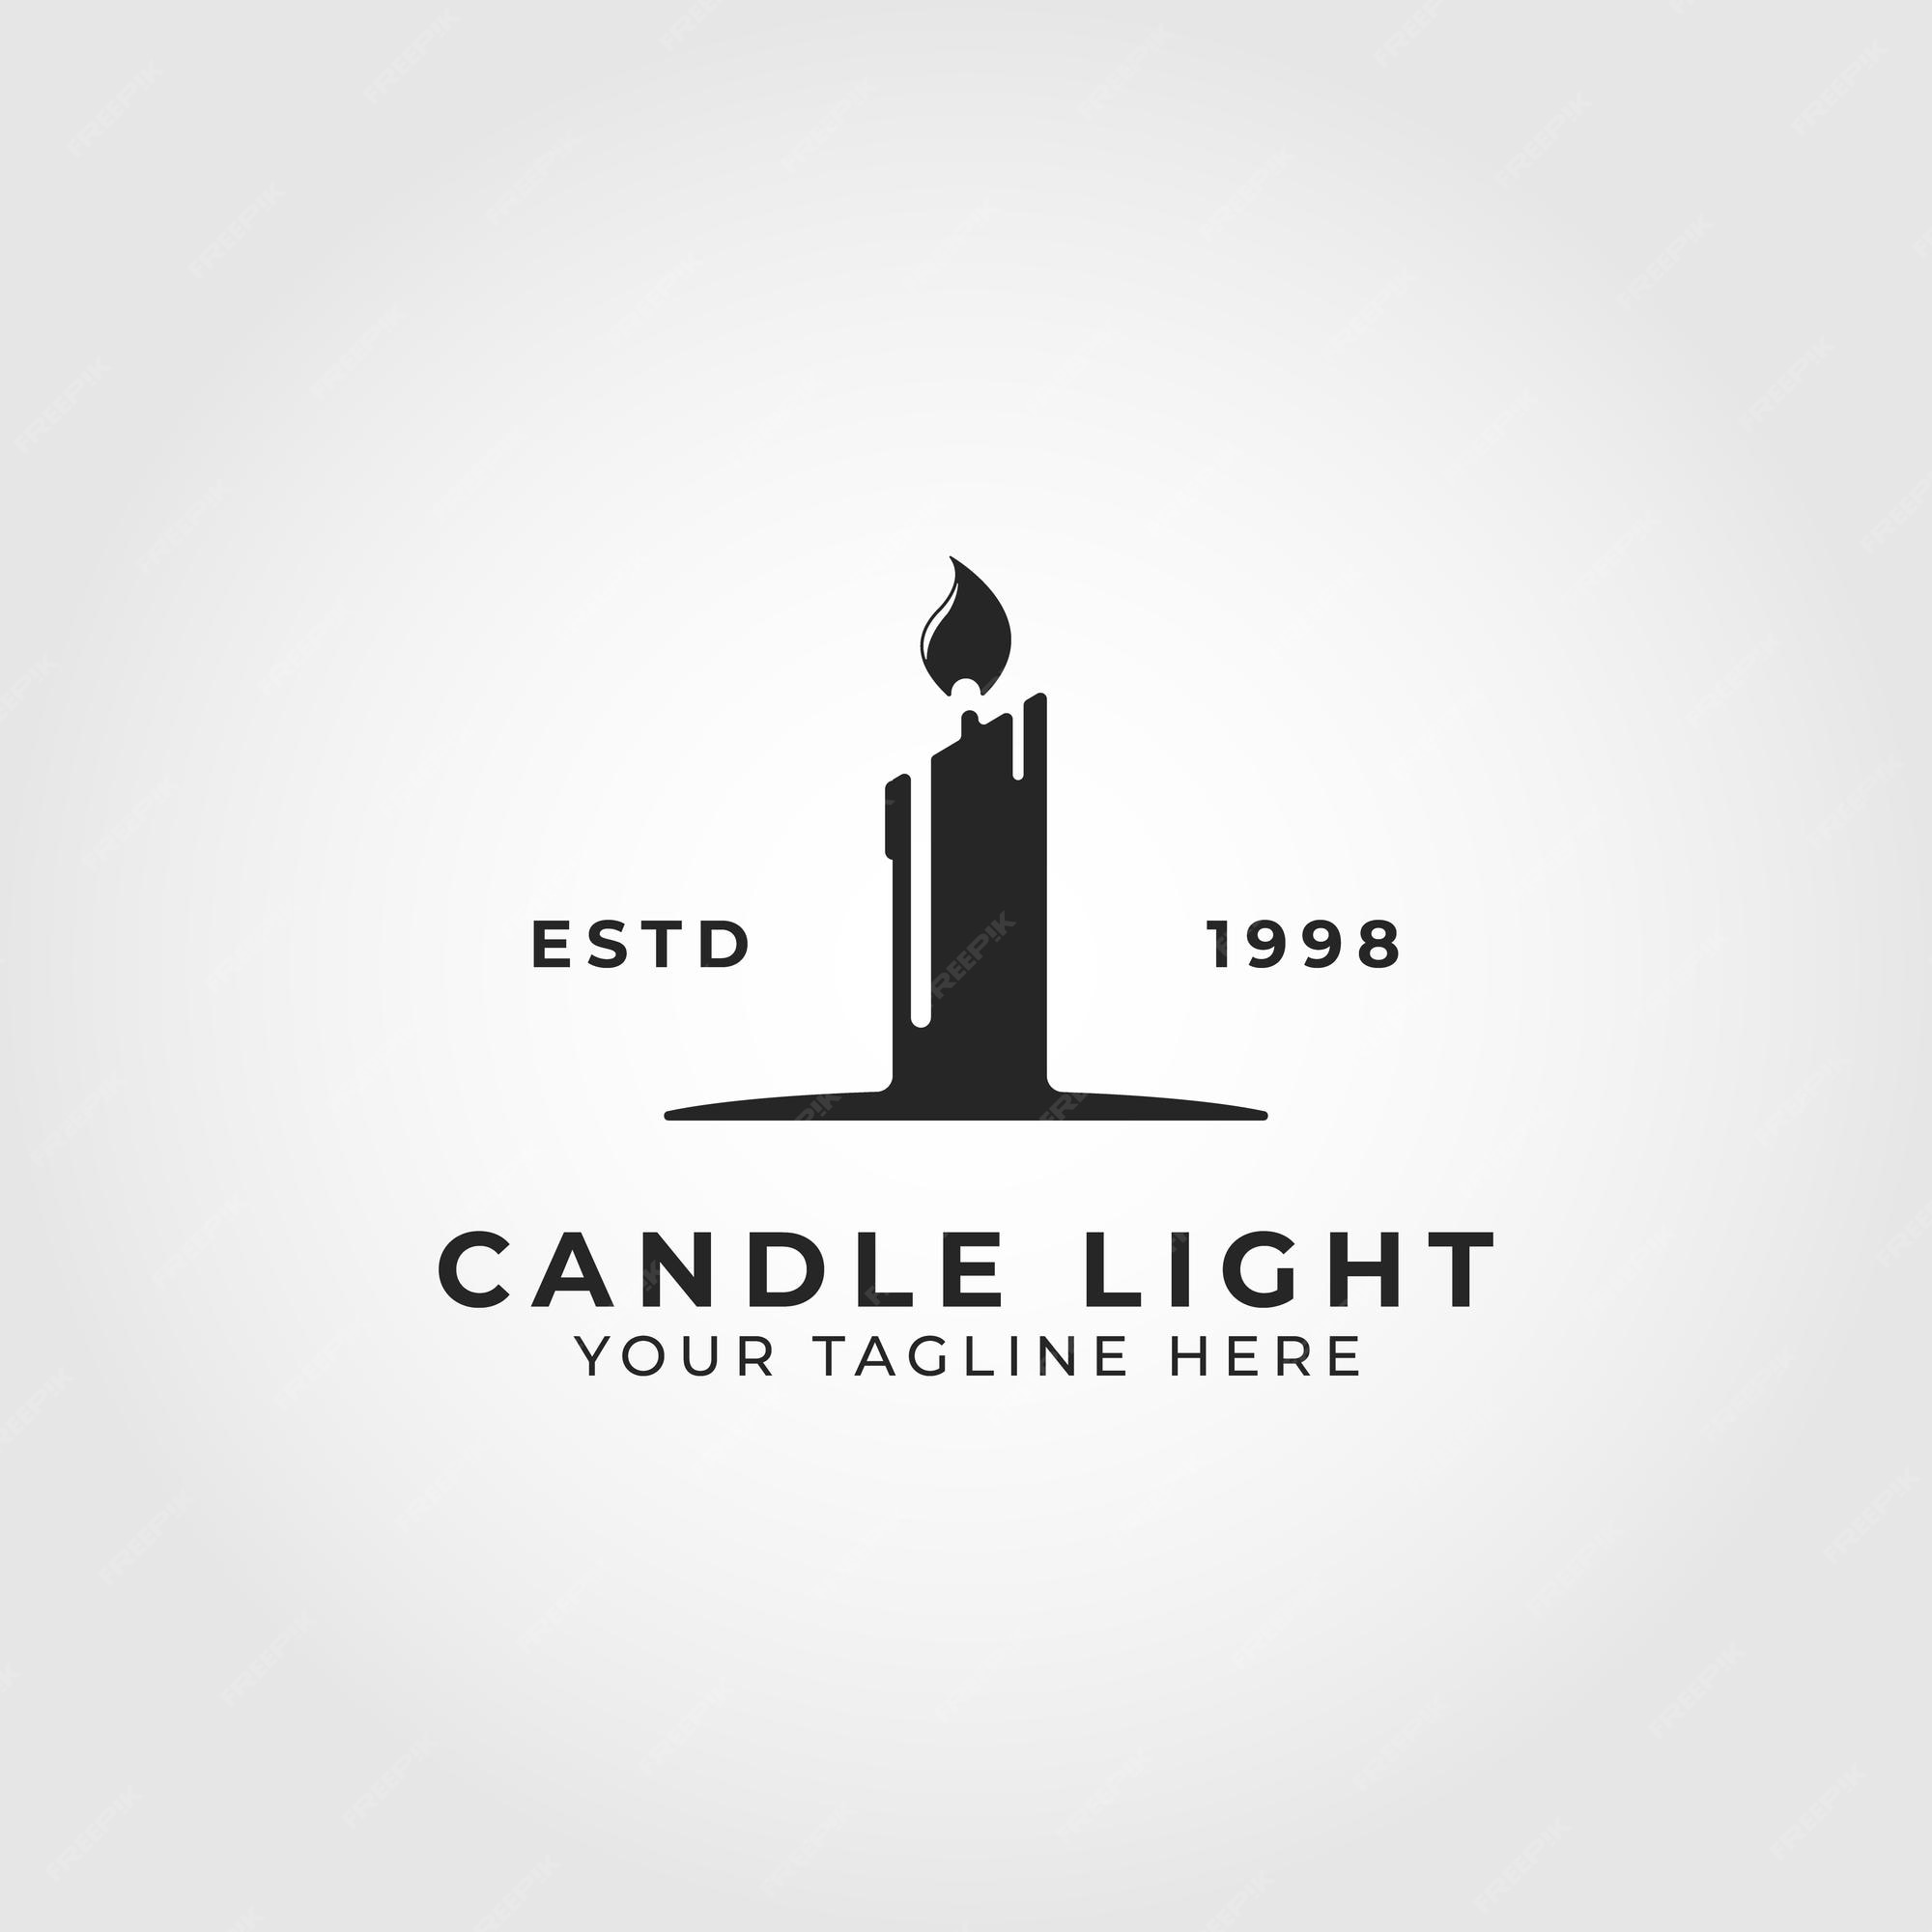 Candle Light Vintage Flame Logo Design Stock Vector (Royalty Free